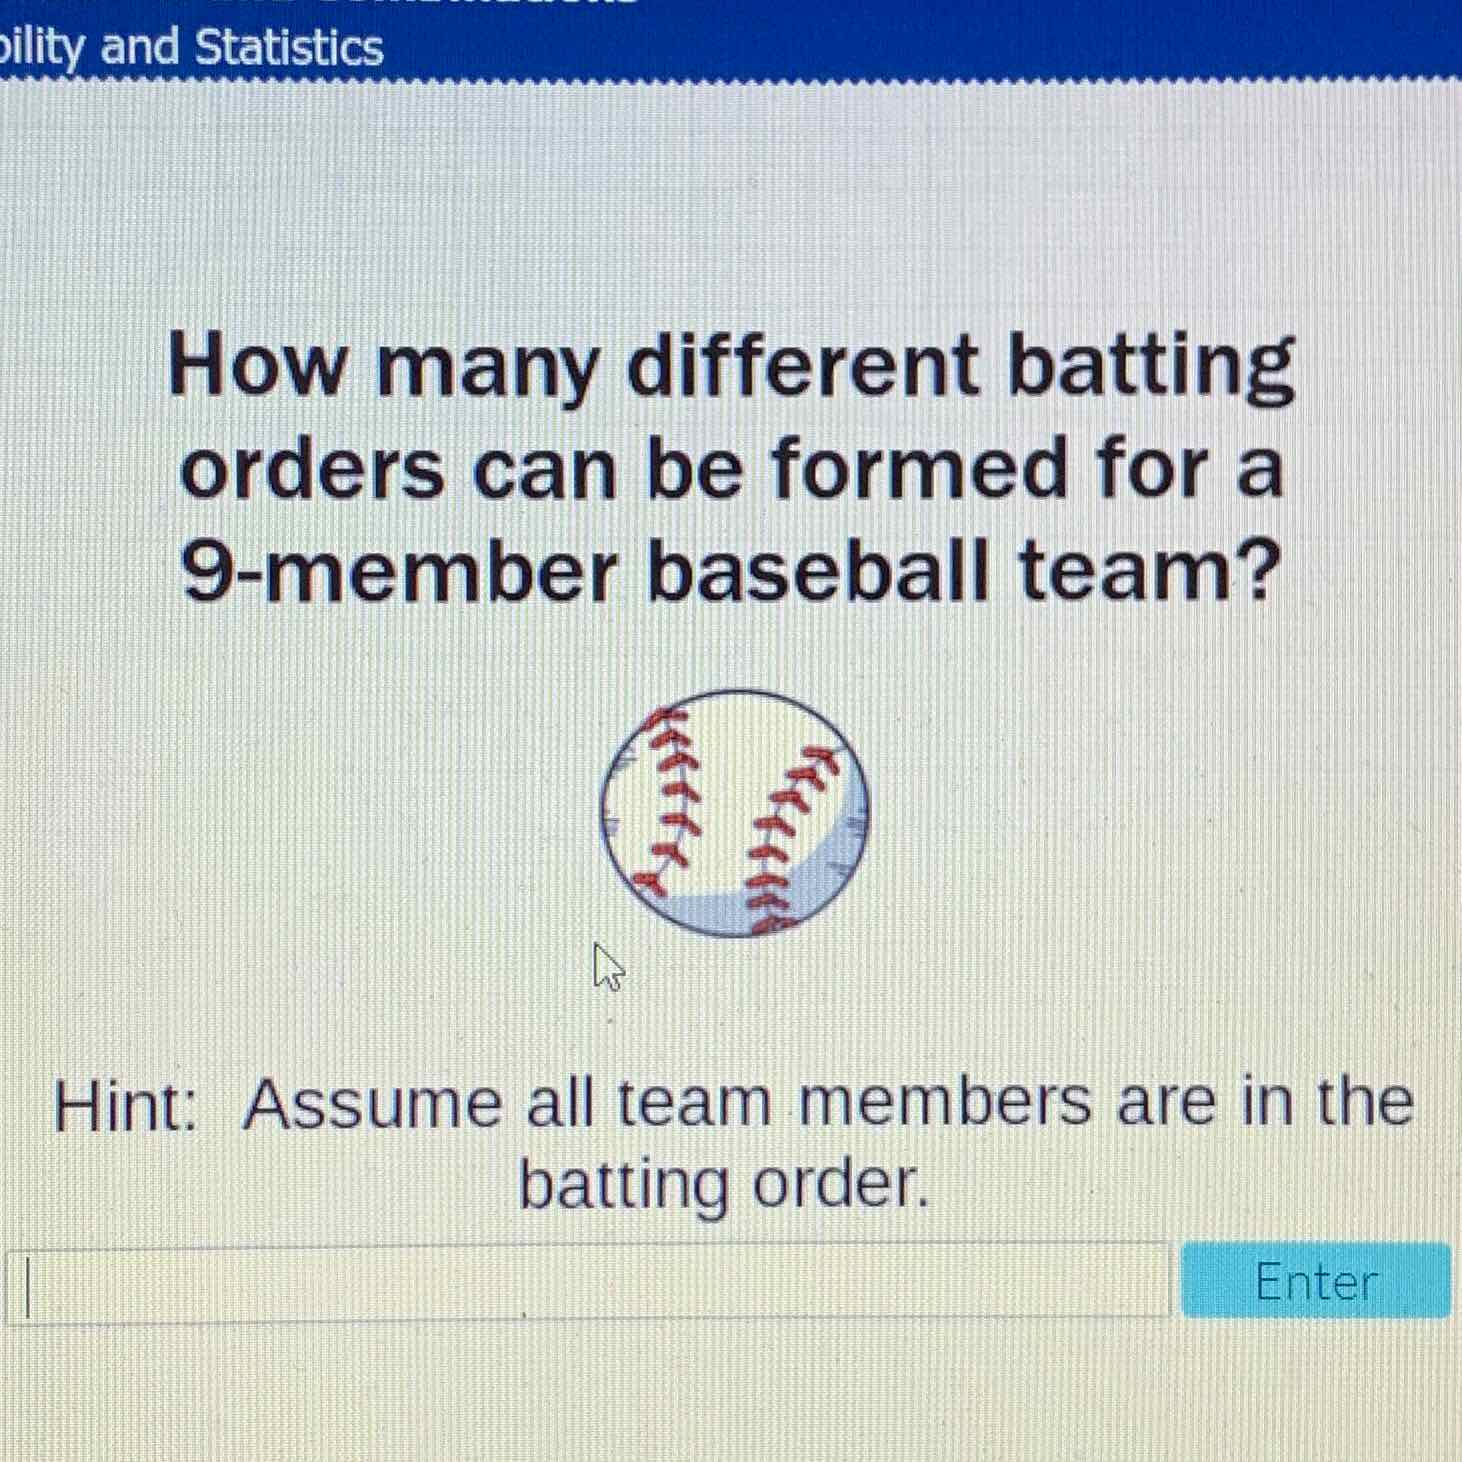 How many different batting orders can be formed for a 9-member baseball team?
Hint: Assume all team members are in the batting order.